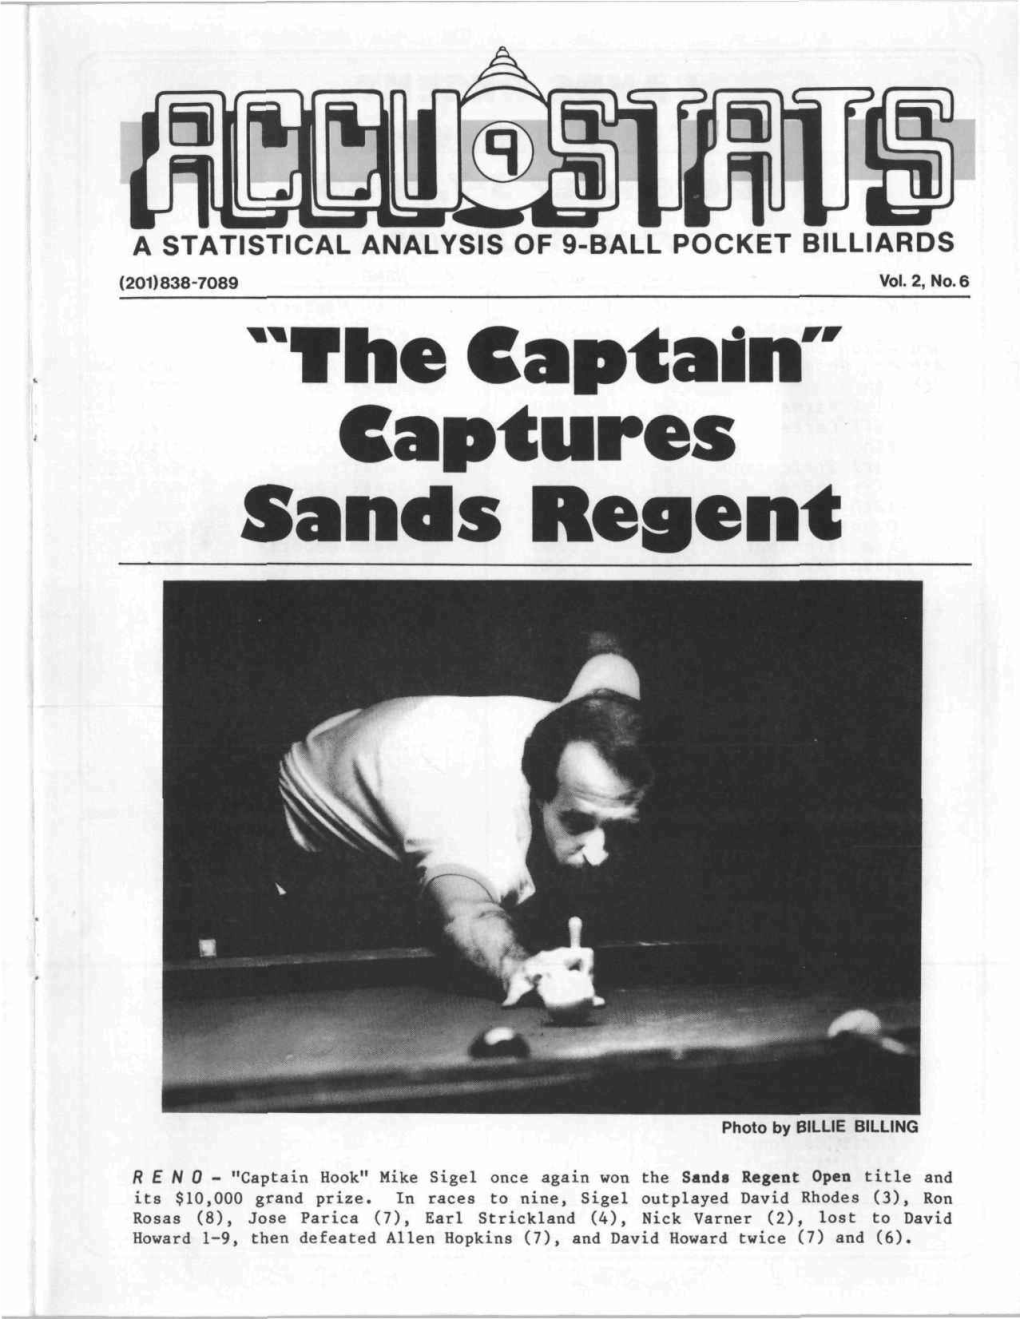 Mike Sigel Once Again Won the Sands Regent Open Title and Its $10,000 Grand Prize